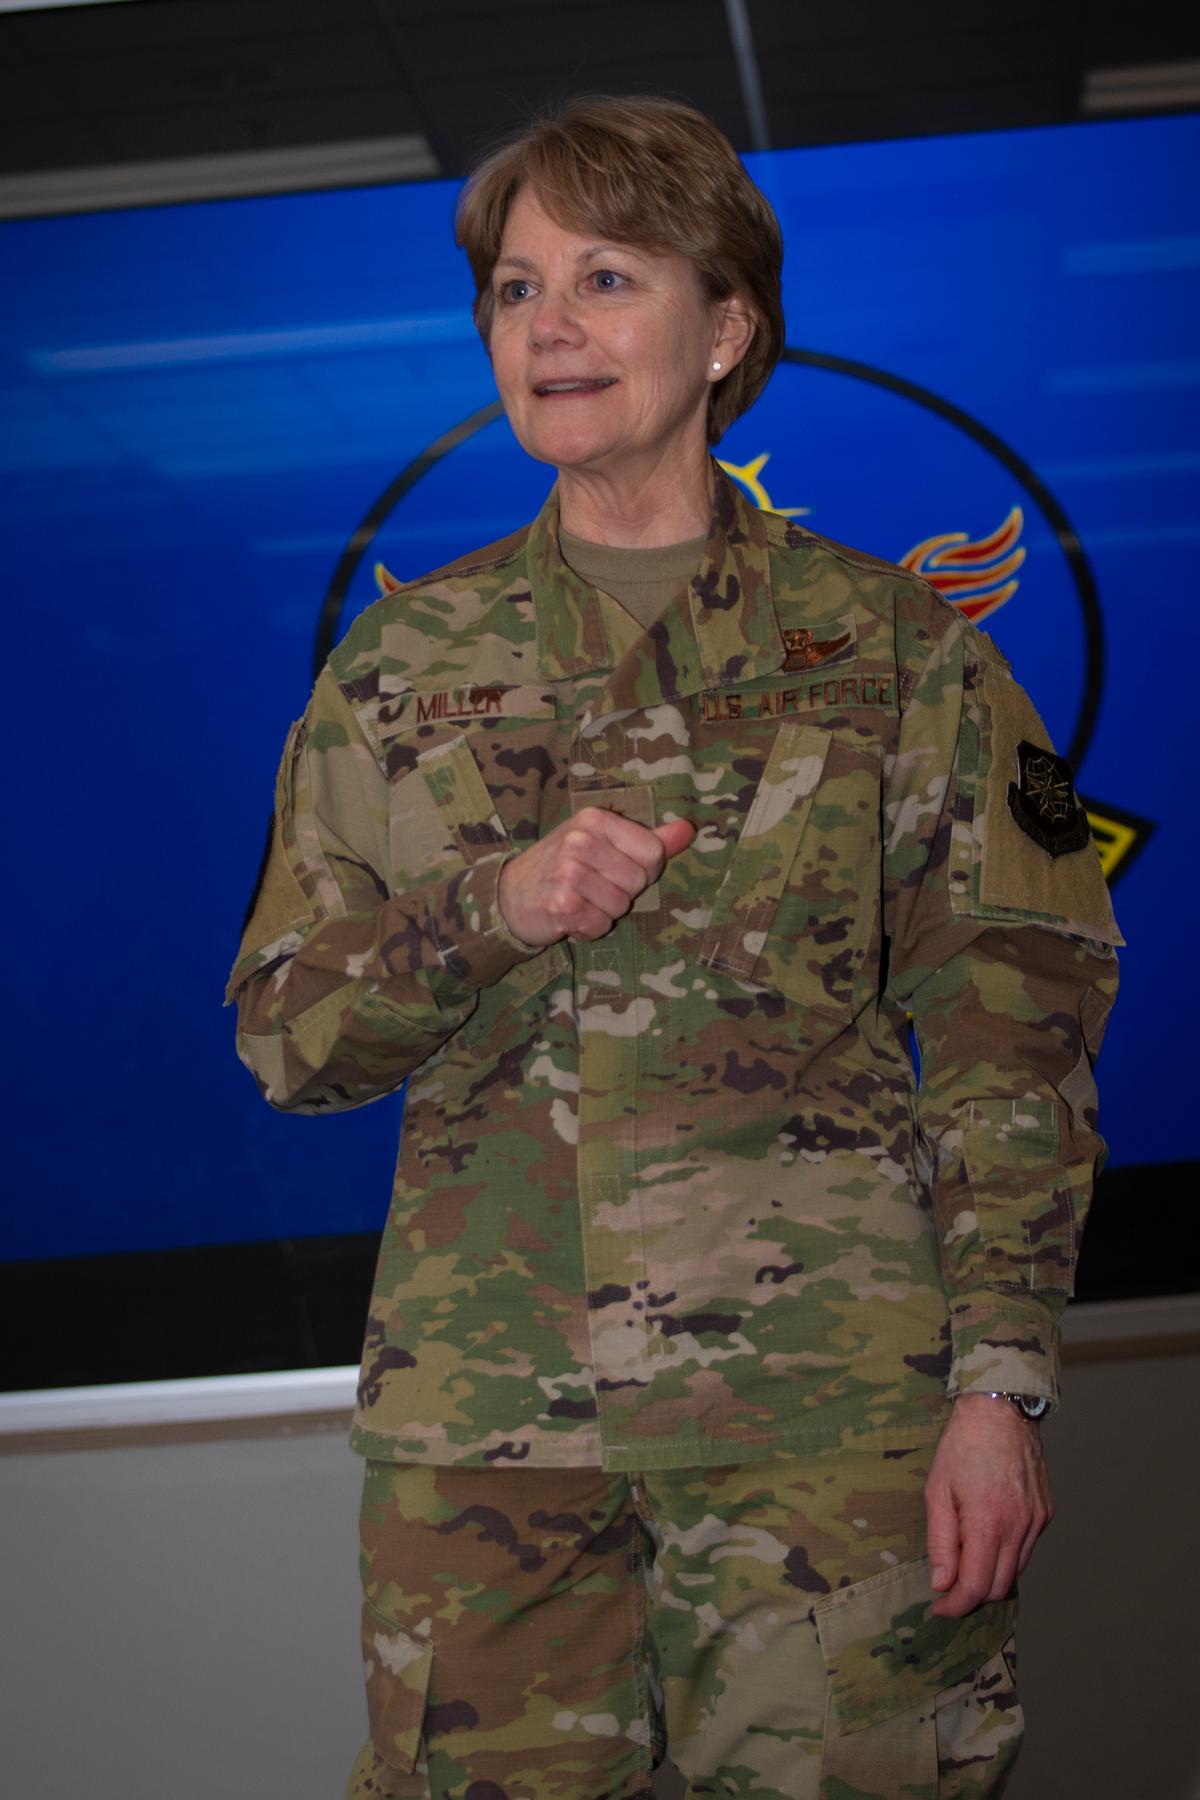 General Maryanne Miller and Chief Greene visited the 43rd Air Mobility Operations Group at Pope Army Airfield last week. (<a href="https://www.dvidshub.net/image/6050831/amc-visit-pope-aaf">Master Sgt. Katherine Novales</a>/DVIDSHUB)